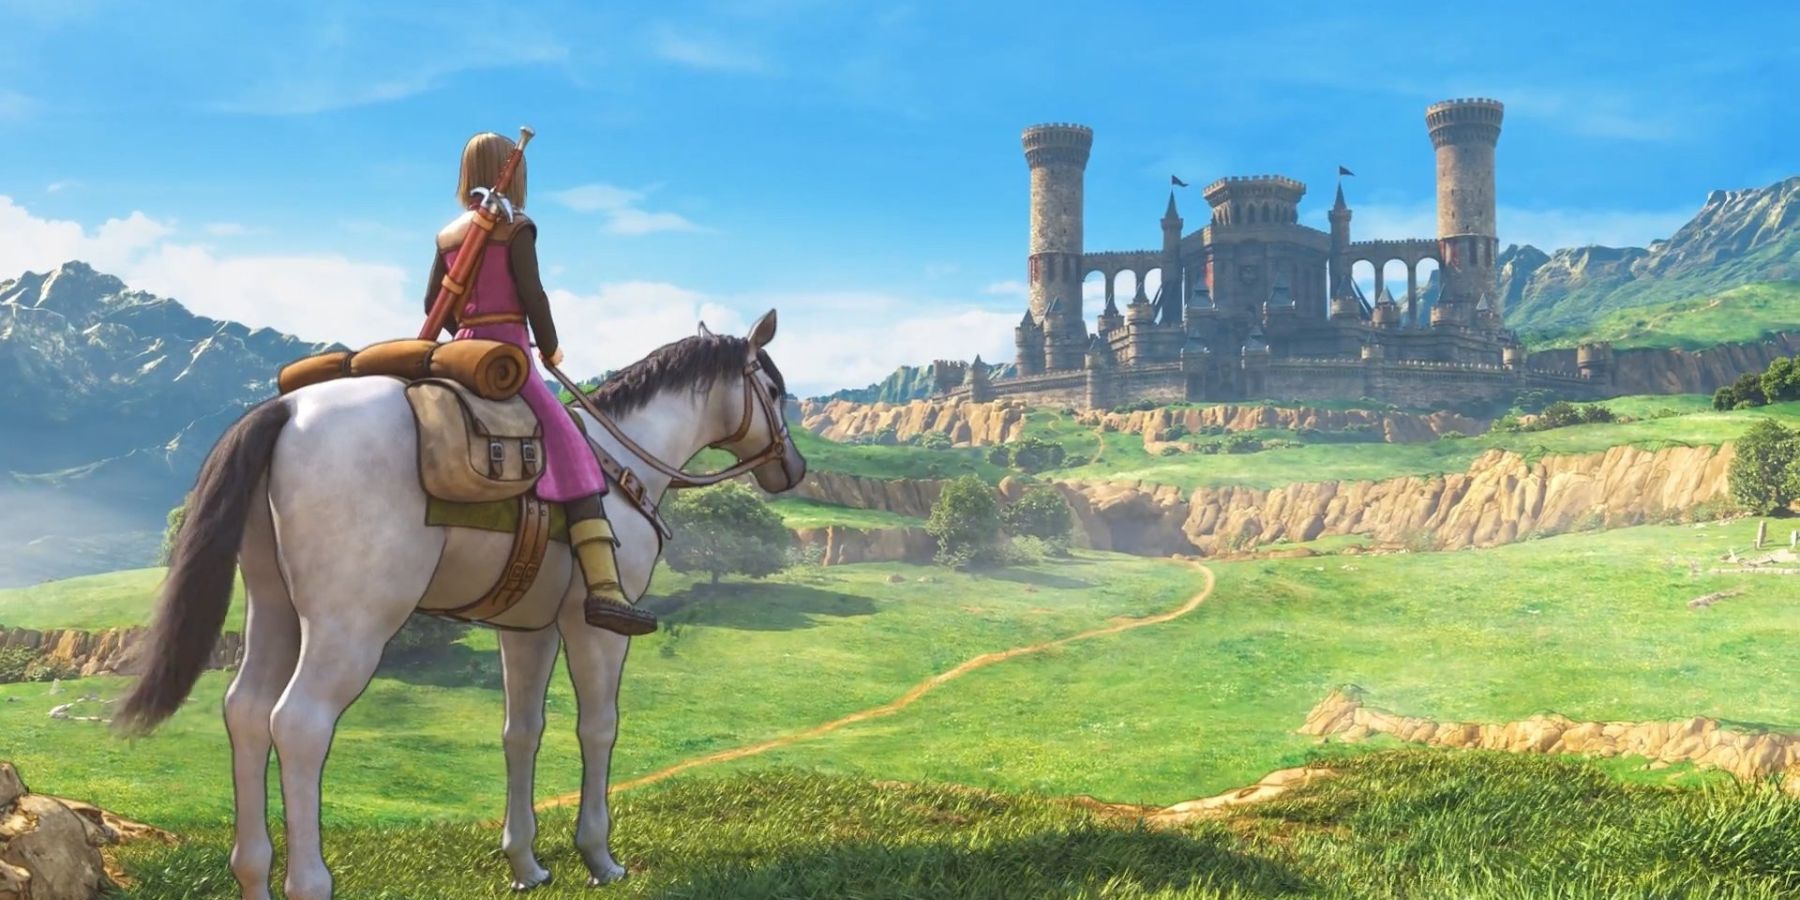 Dragon Quest Character Riding a Horse